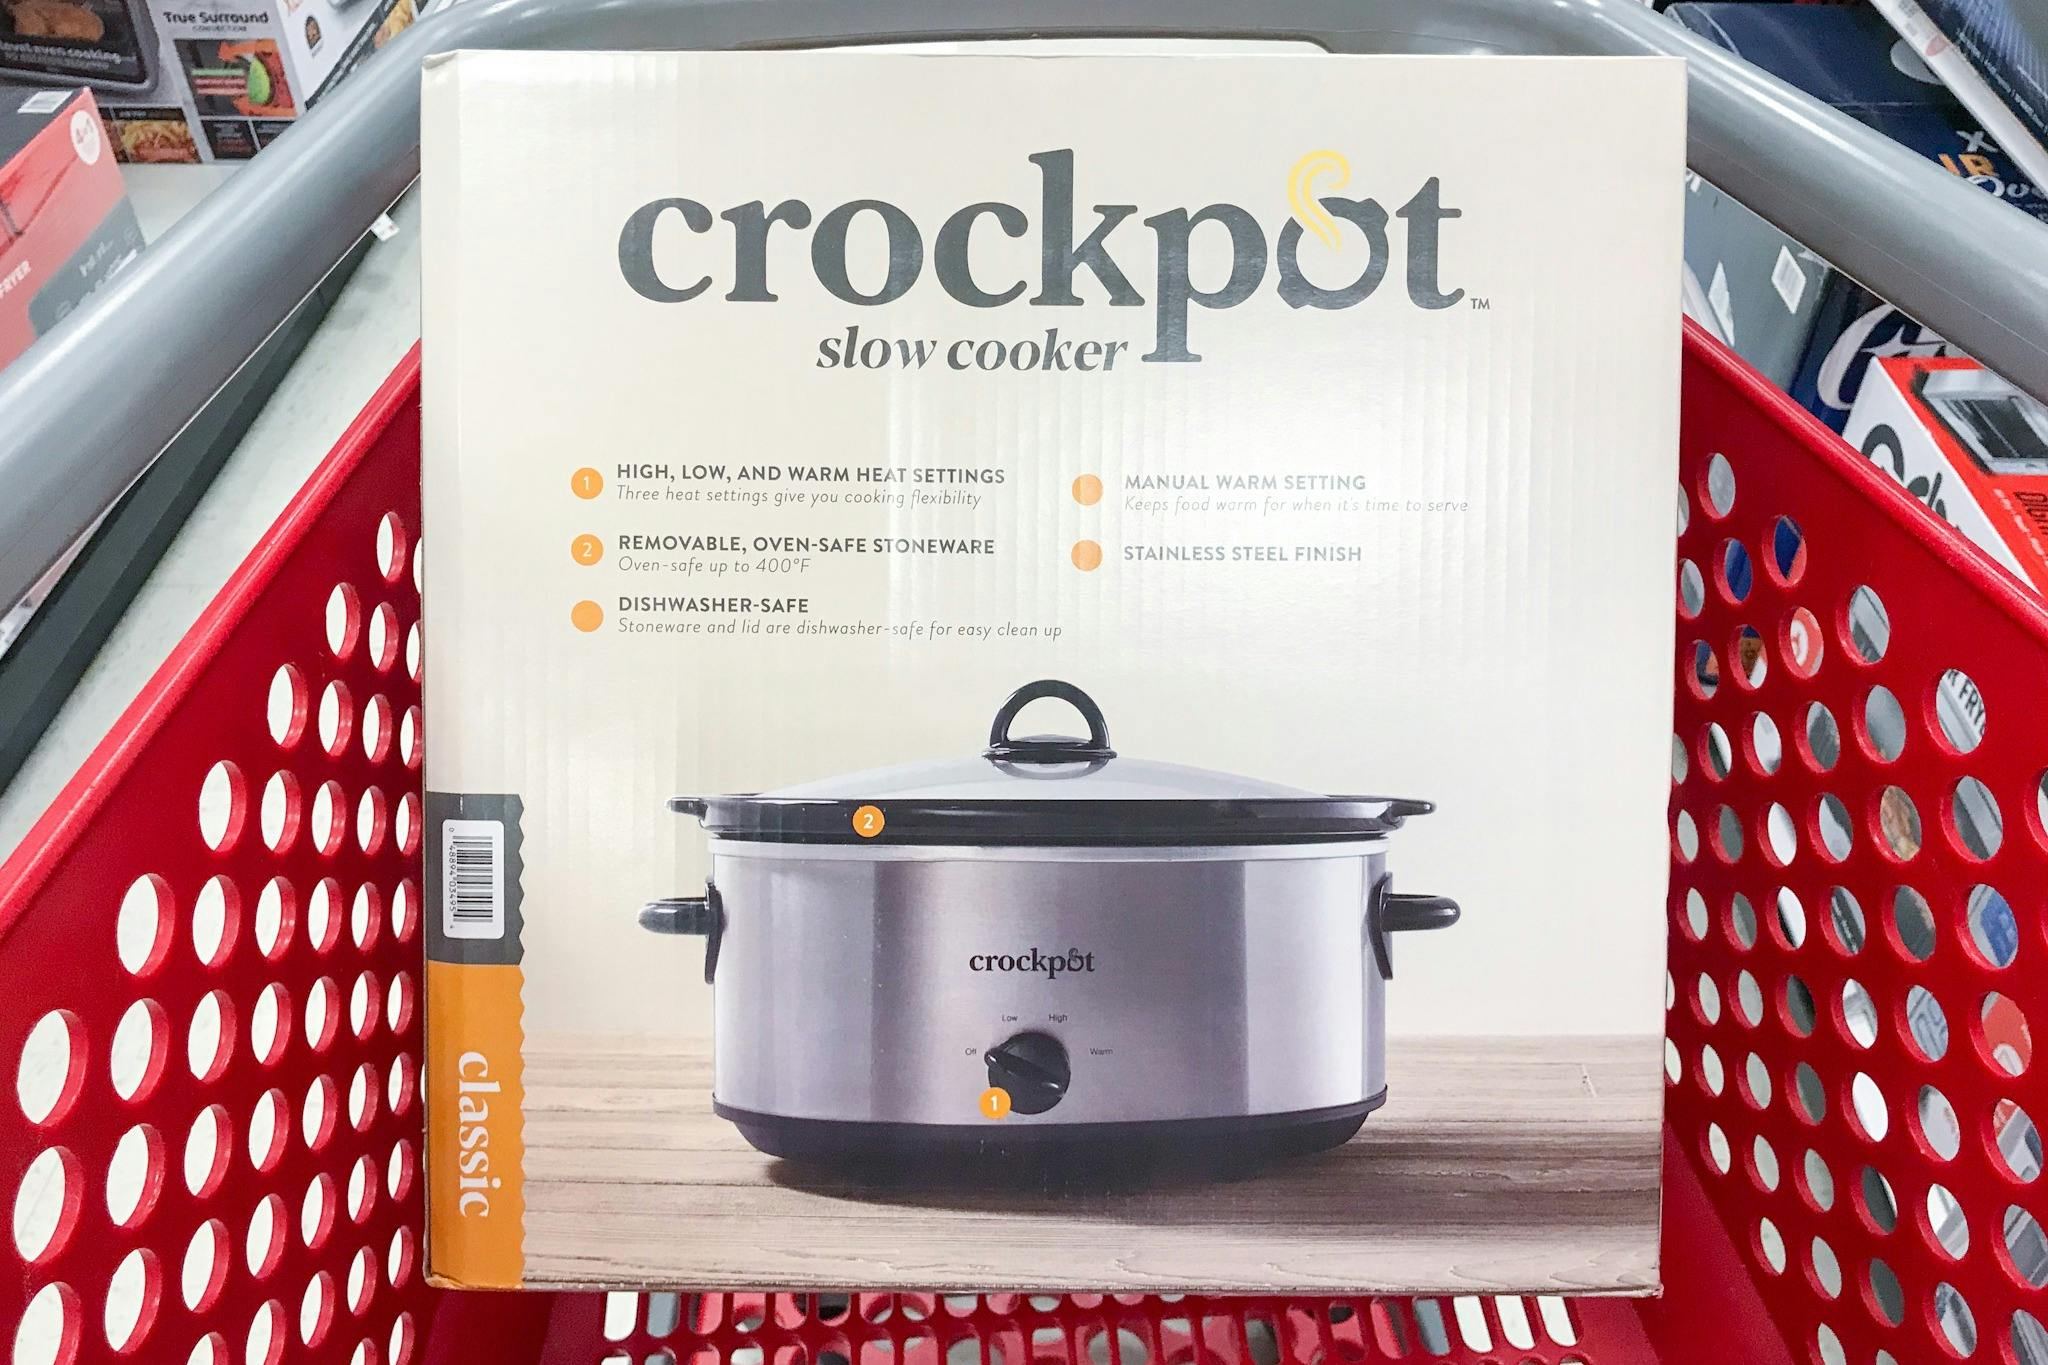 Crockpot 7-Quart Slow Cooker, Only $21.24 at Target - The Krazy Coupon Lady